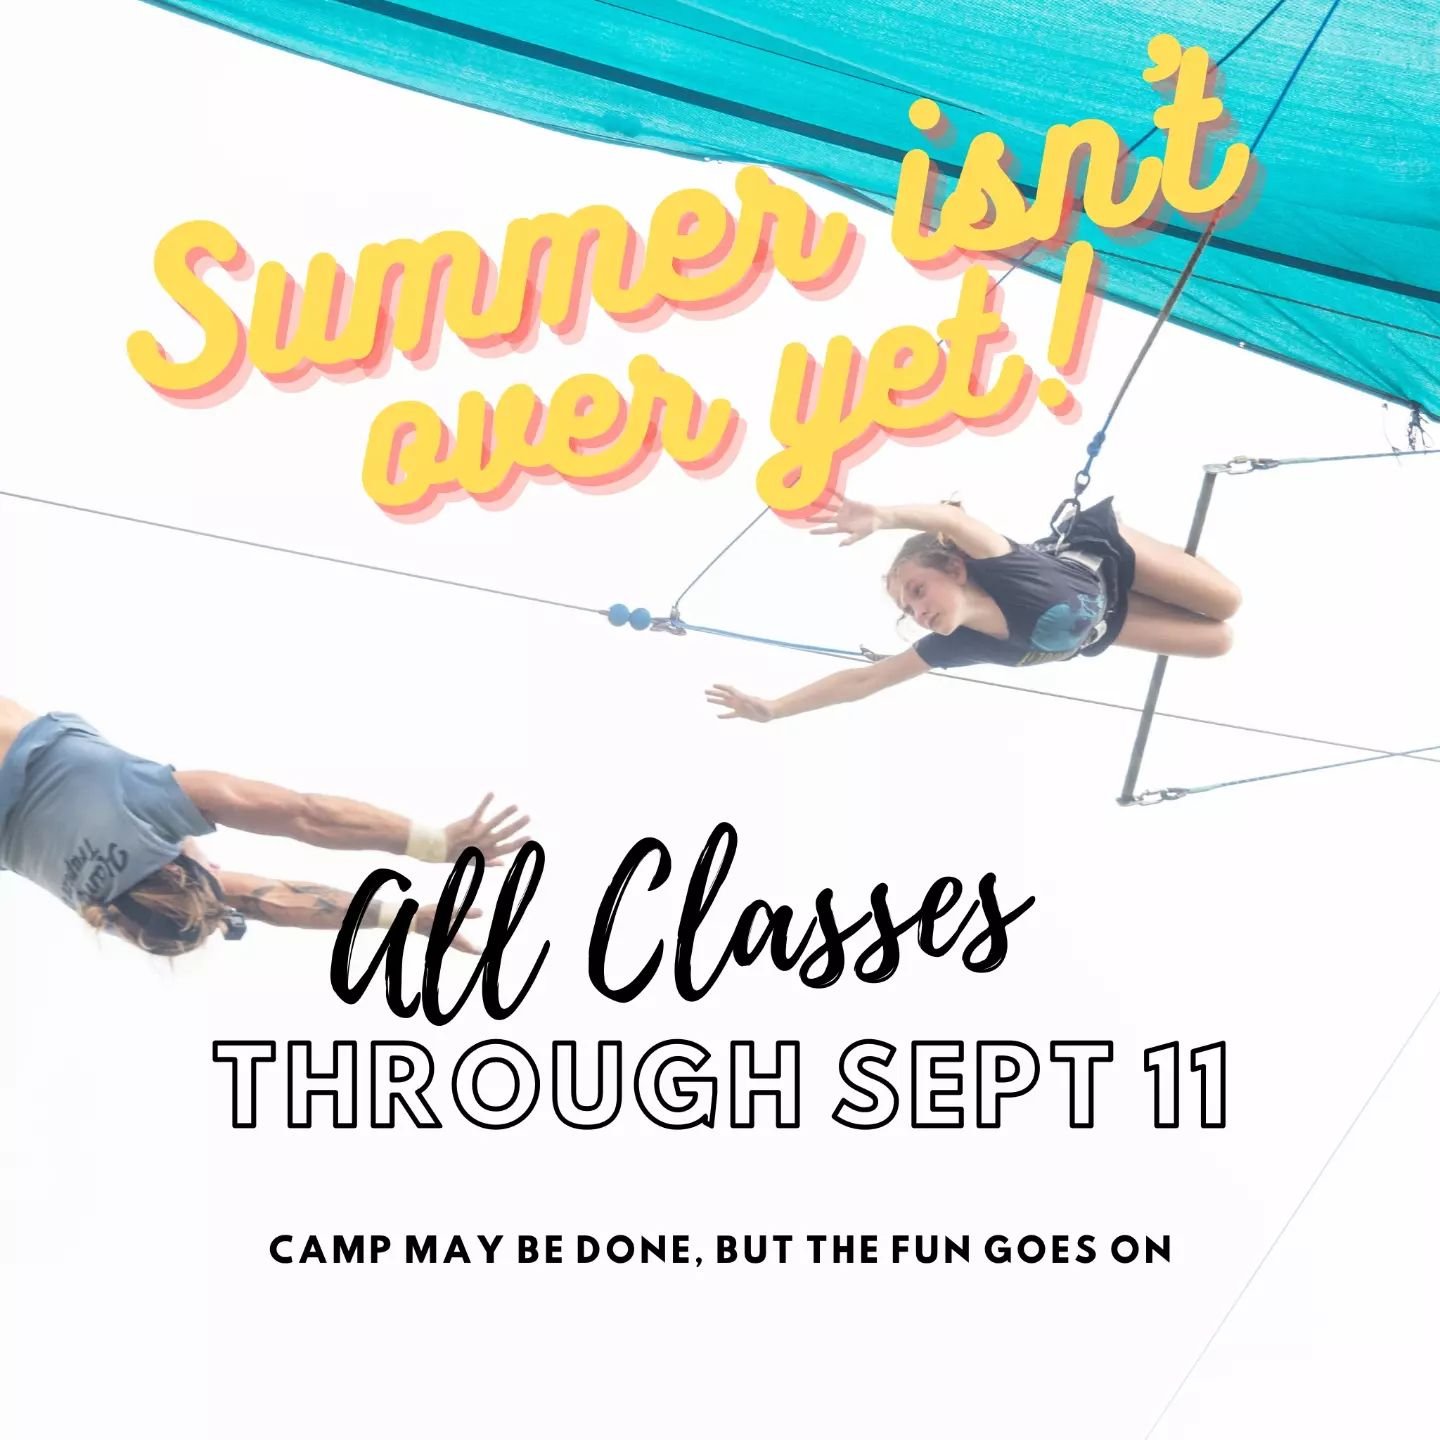 The summer fun continues on the #flyingtrapeze so bring the kiddos out for one last thrill before school begins! Just because camp is done doesn't mean the fun has to stop! We still have classes running and there's one spot left in our intensive flyi